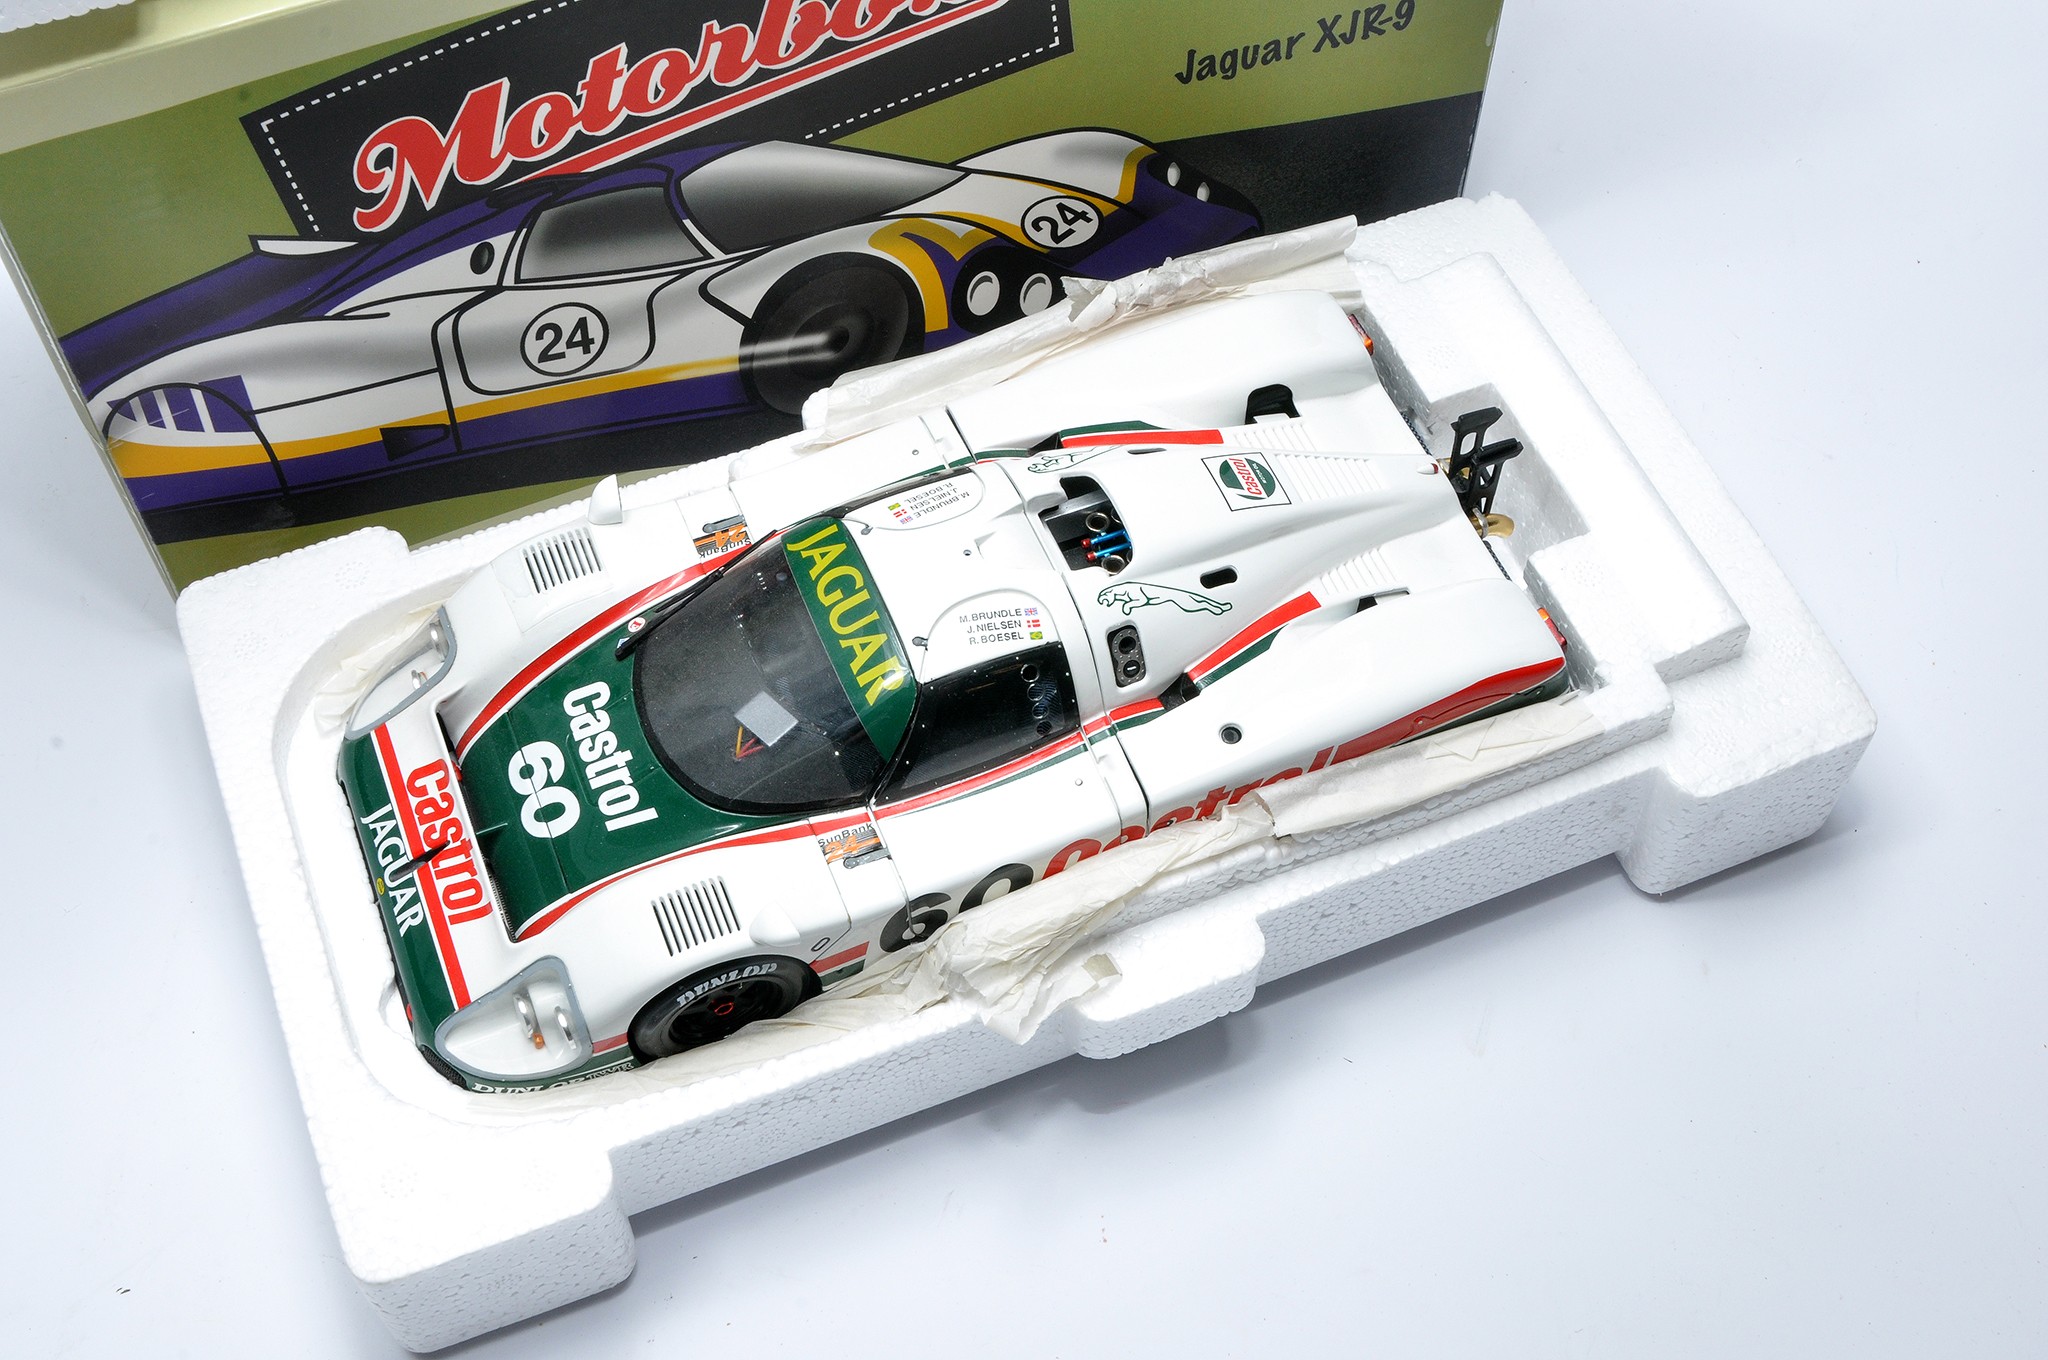 Exoto Motorbox 1/18 diecast model racing car issue comprising Jaguar XJR-9. Looks to be without - Image 2 of 2